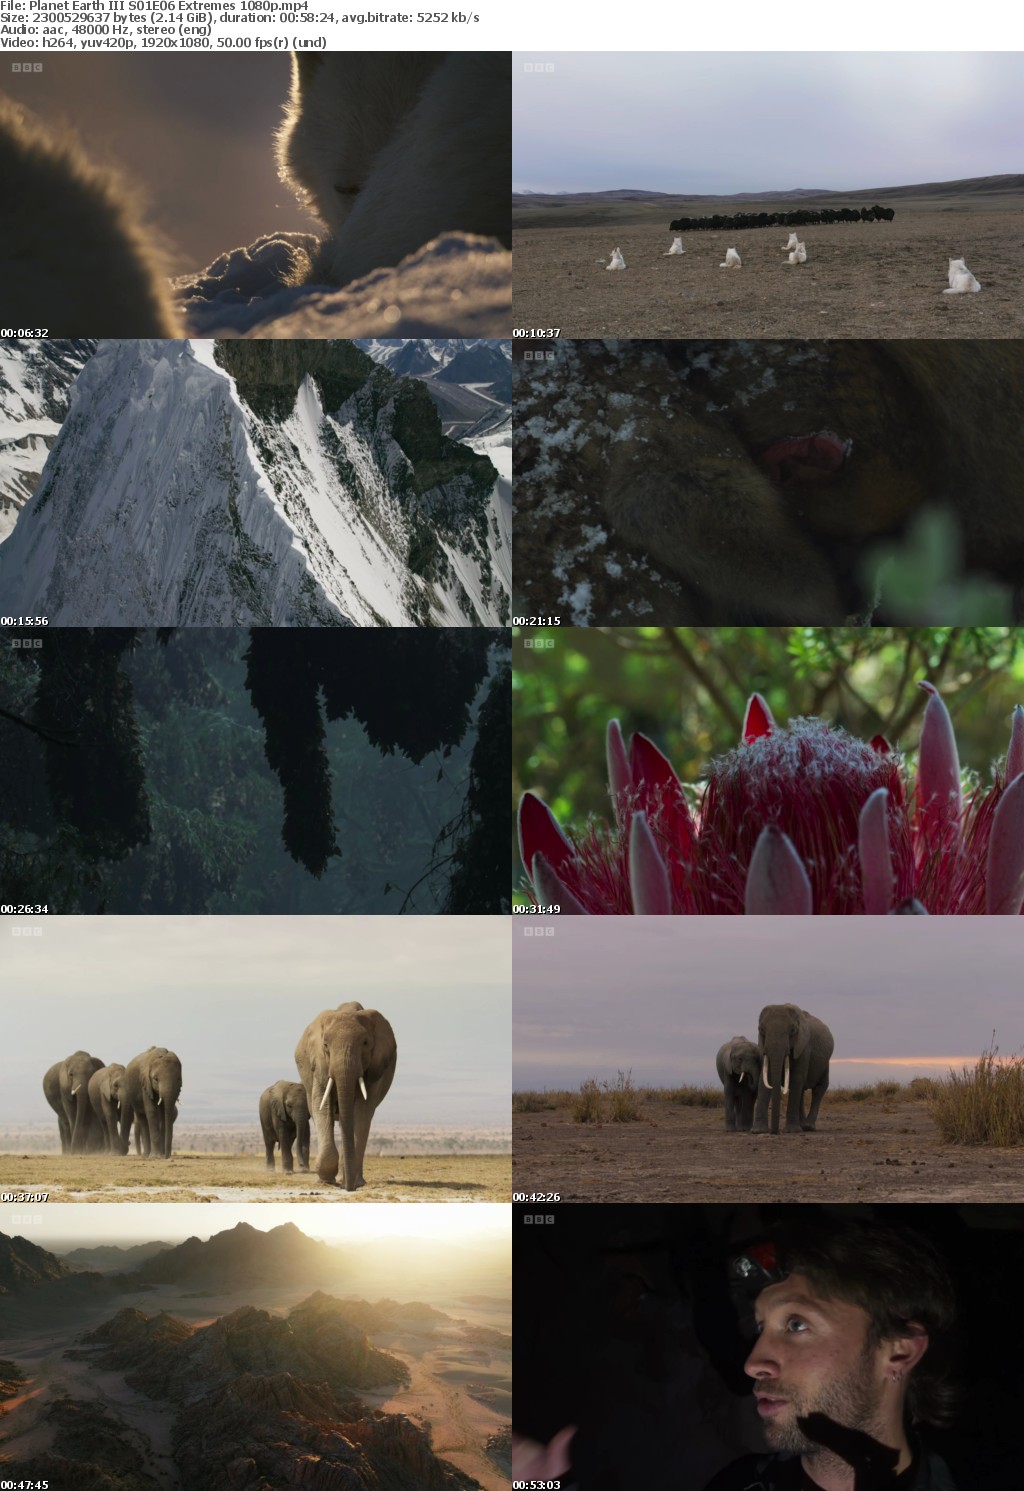 Planet Earth III S01E06 Extremes (1080p, soft Eng subs)